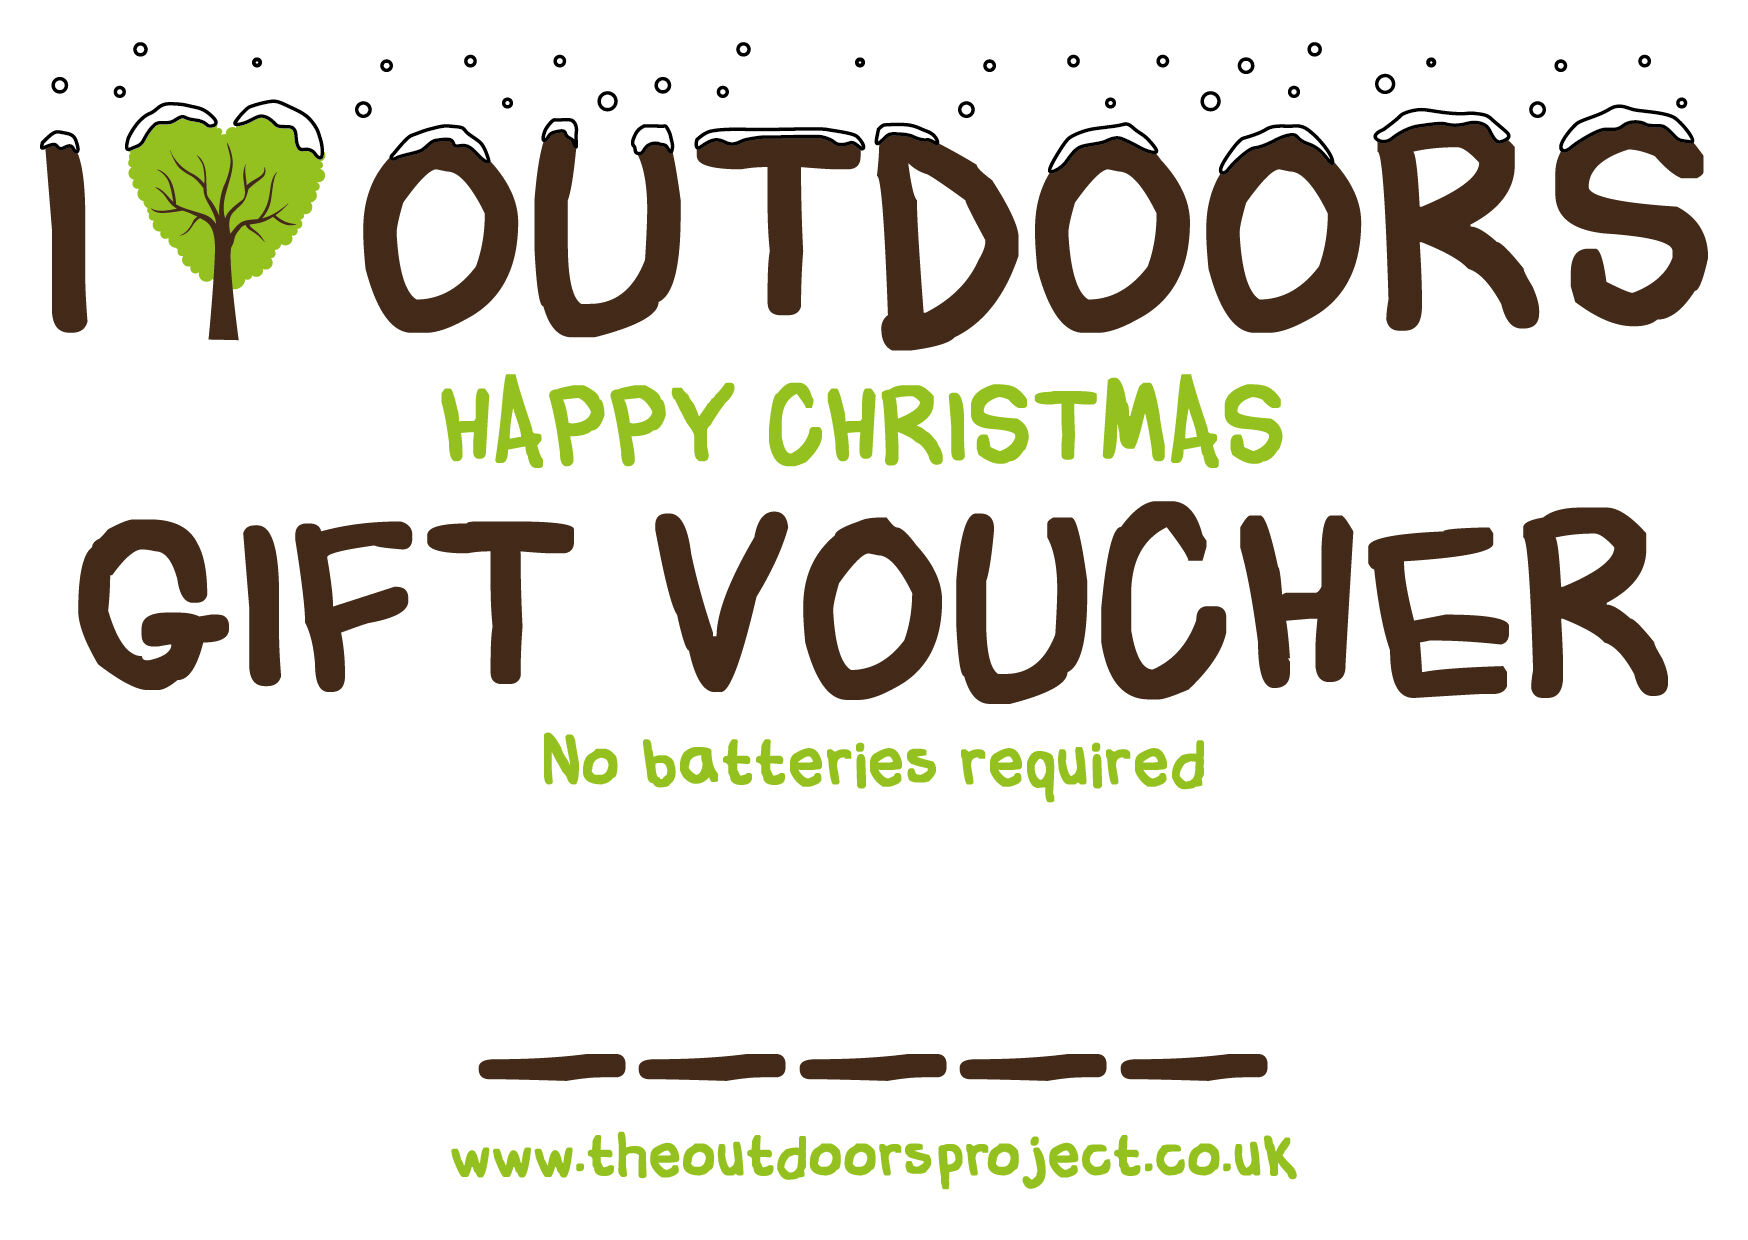 XMAS GIFT VOUCHER  - NO BATTERIES REQUIRED